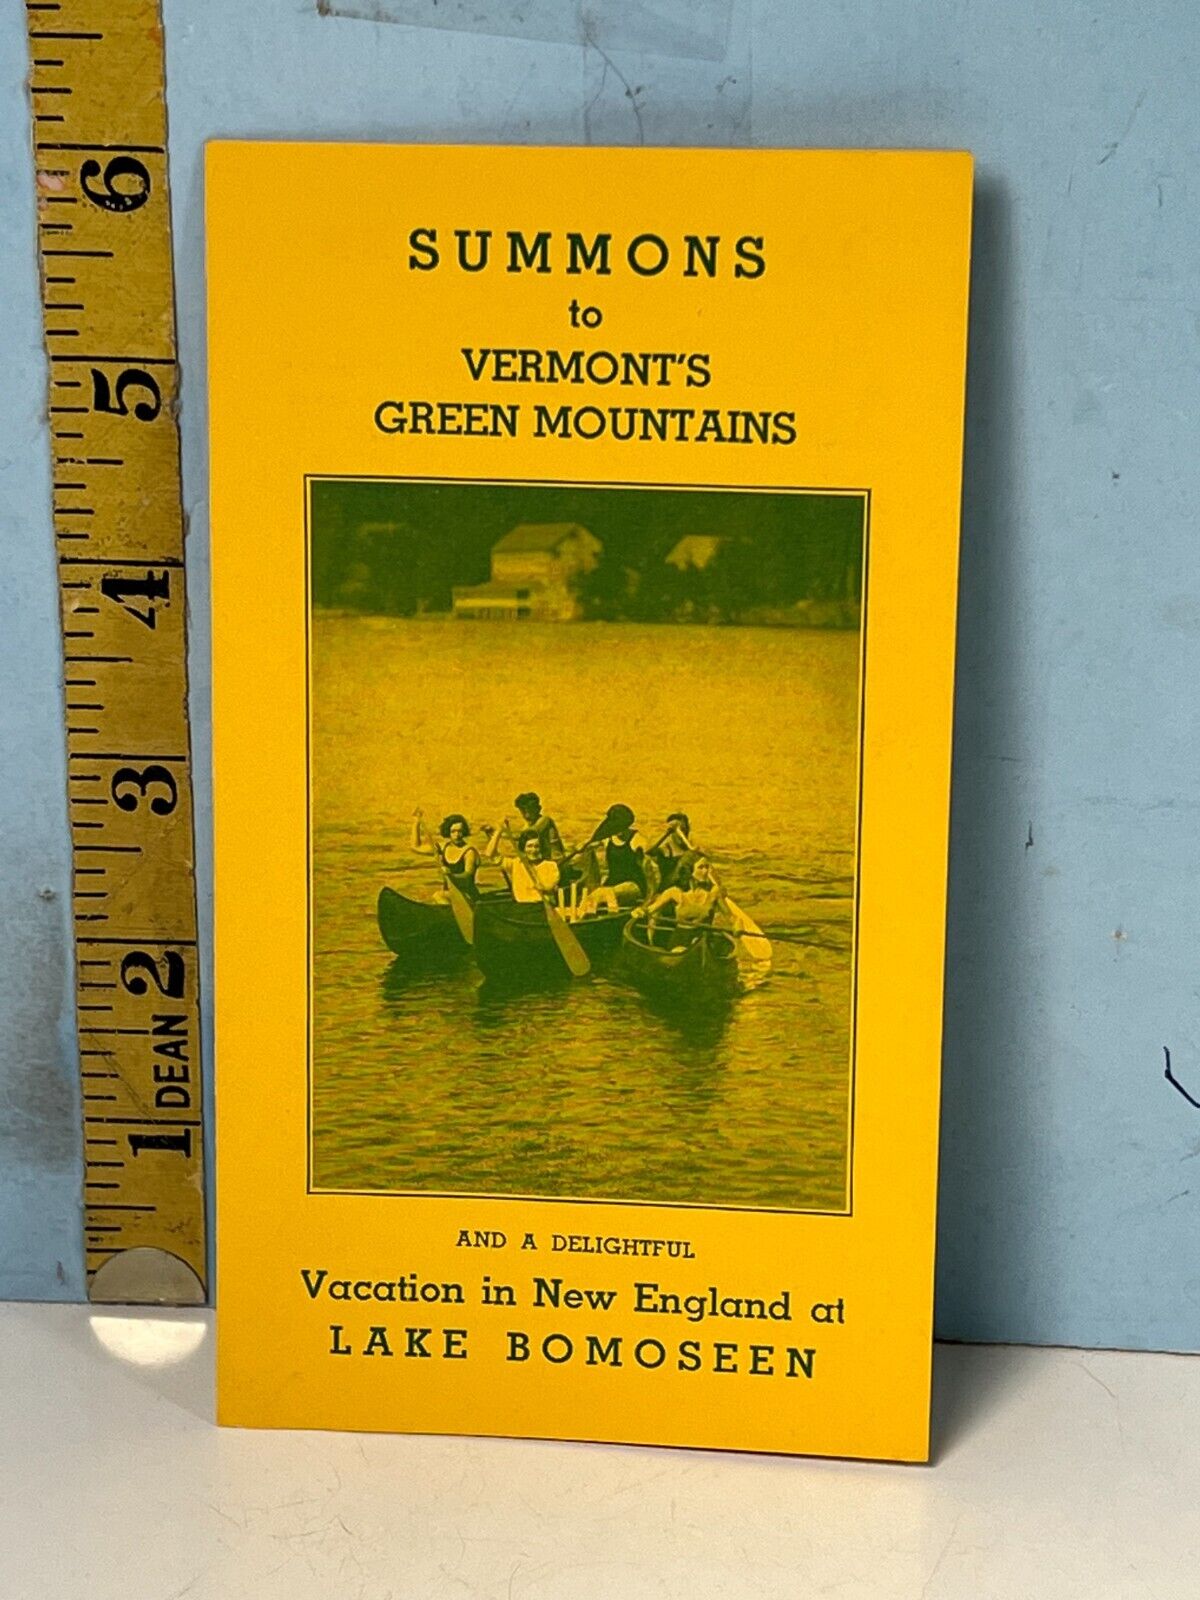 1936 Summons in Vermont Green Mountains, Vacation in New England Pamphlet